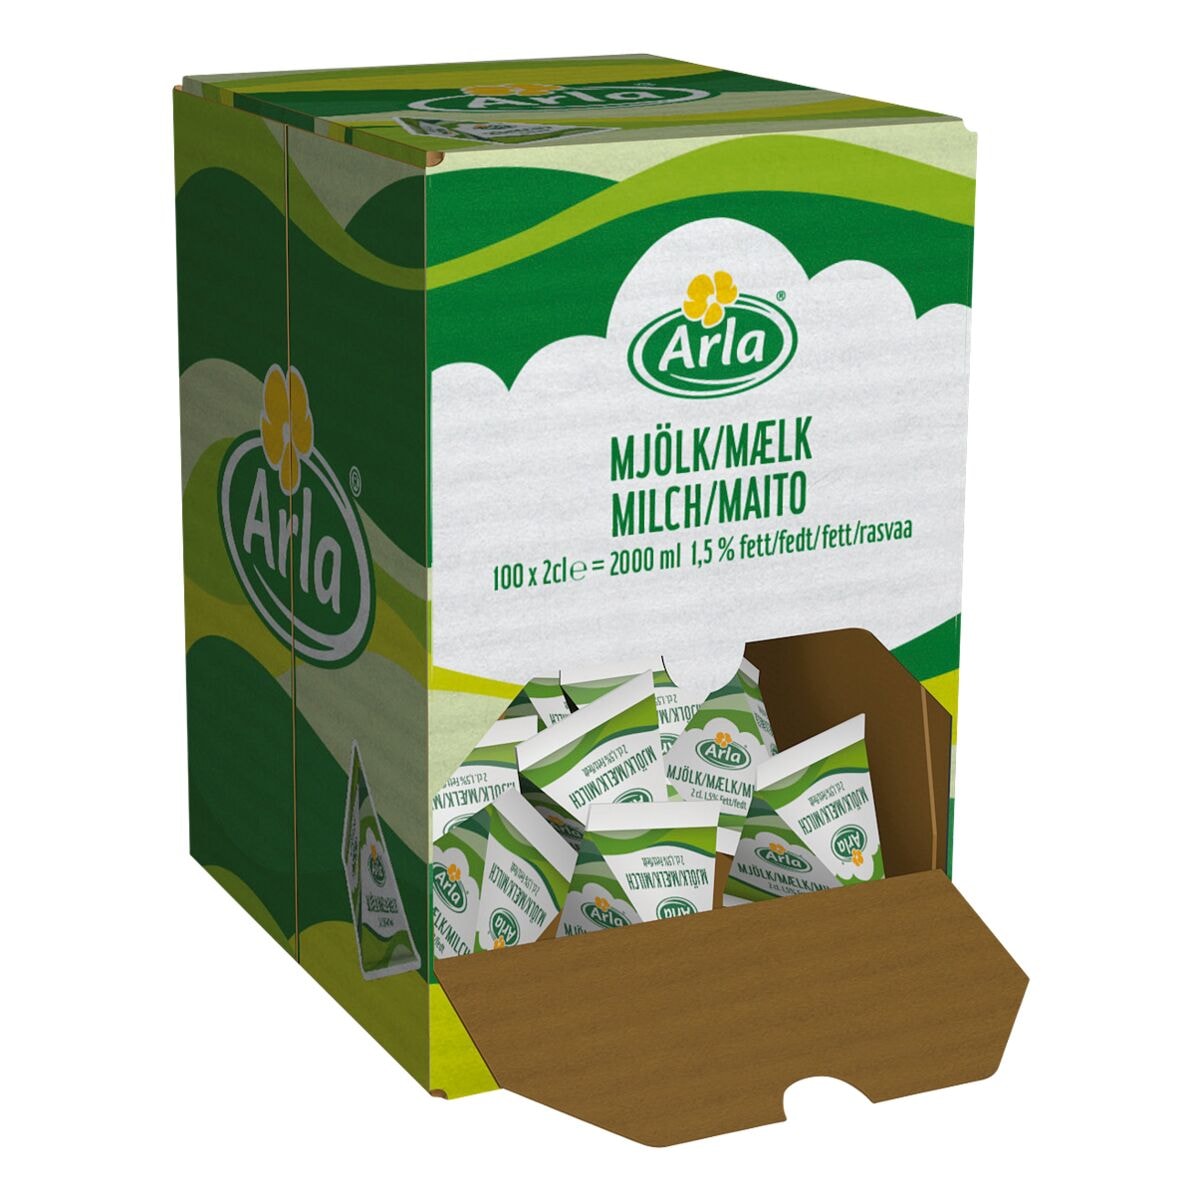 Hellma Portionsweise verpackte Milch H-Milch Arla 1,5%